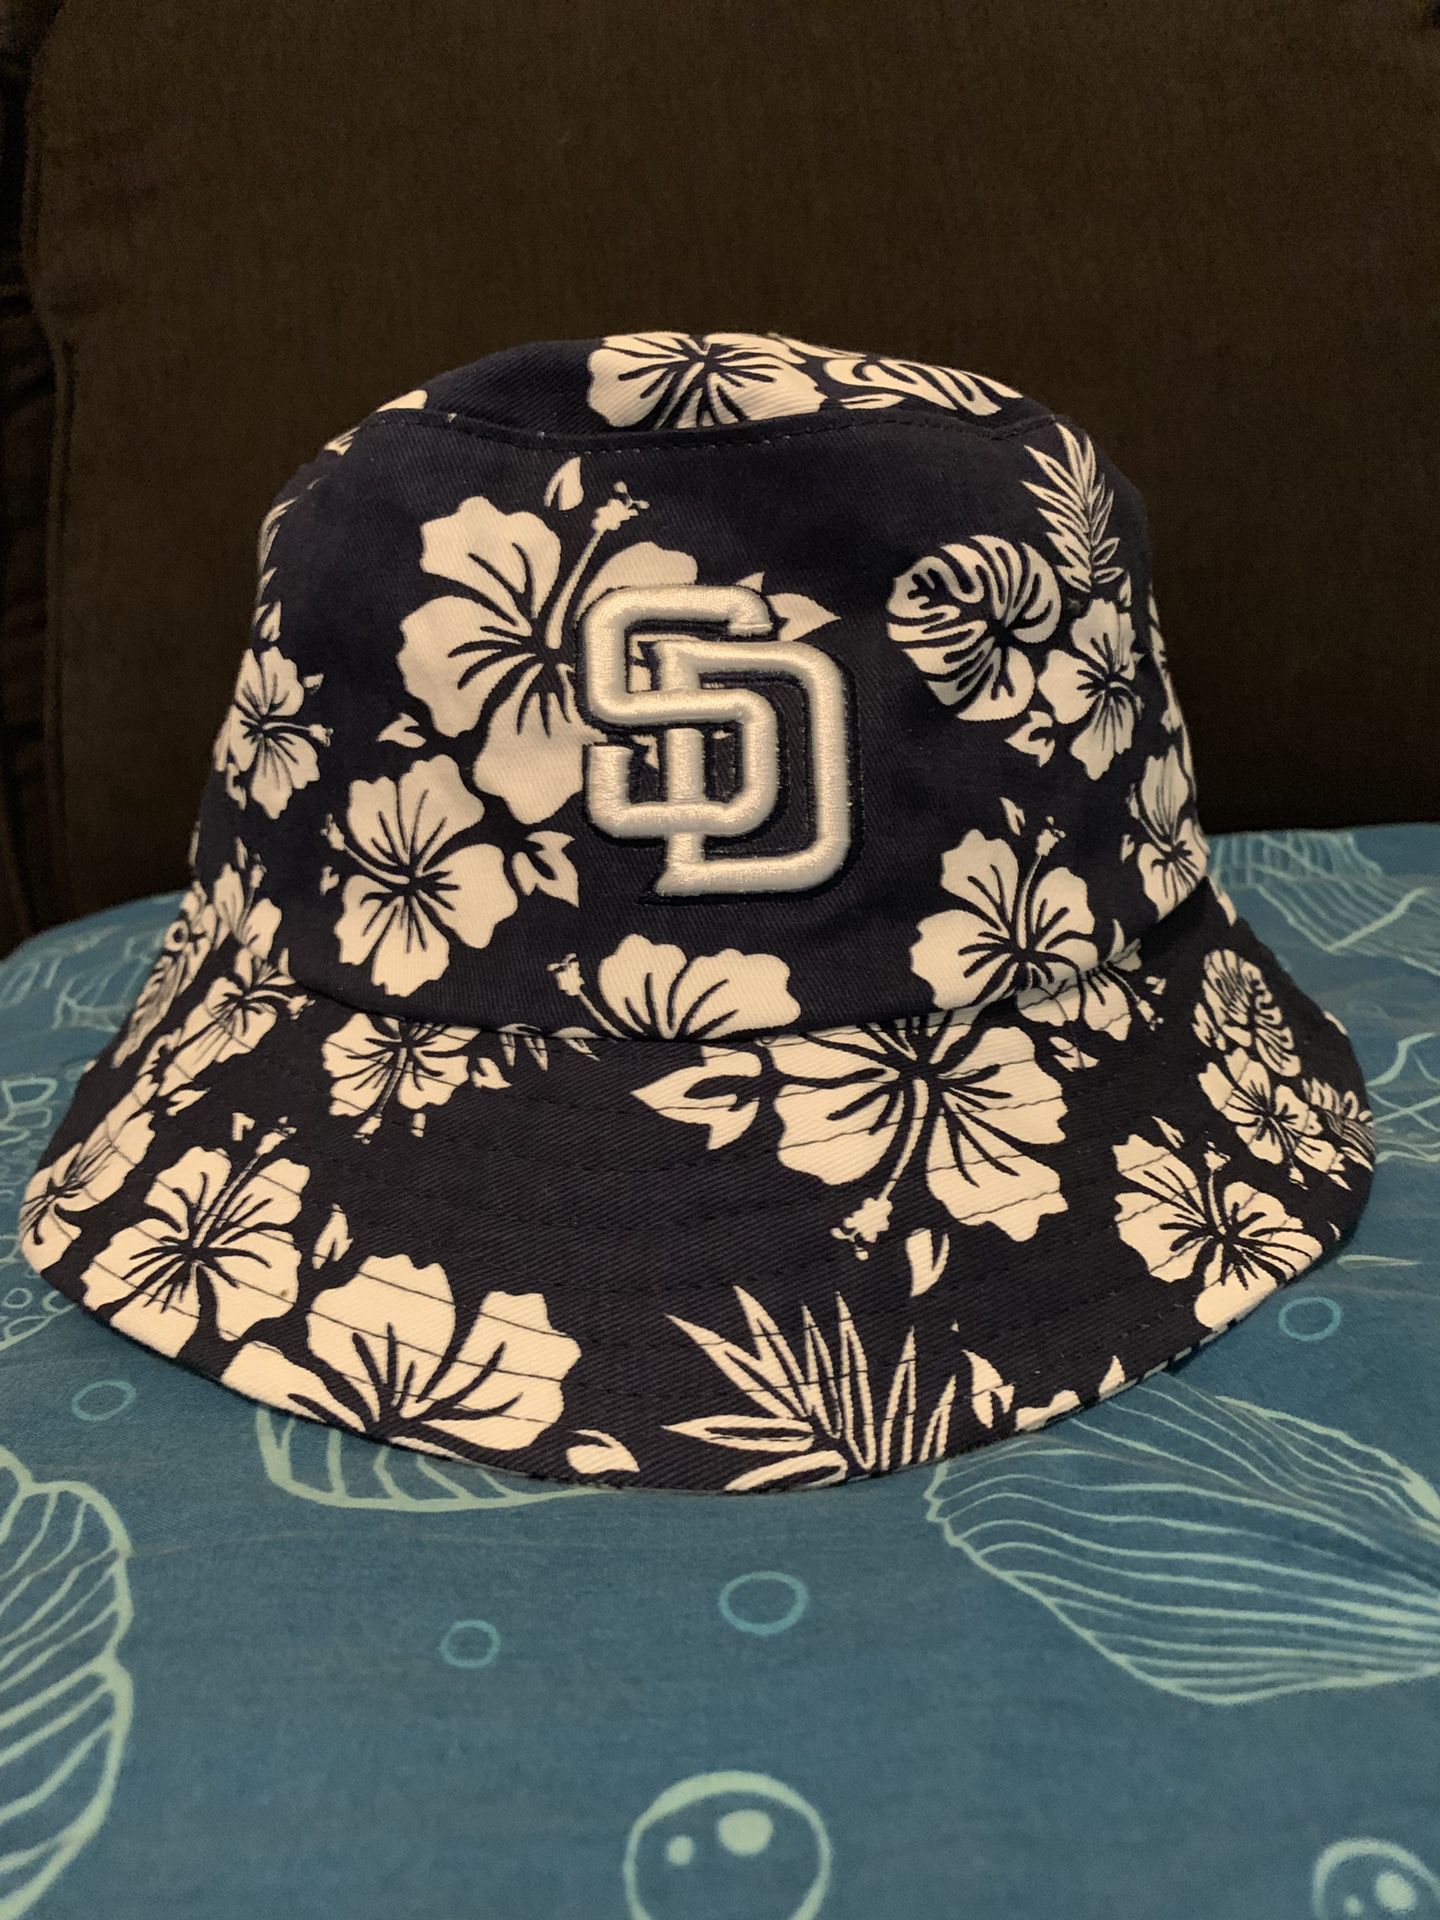 Sun's out, bucket hats on ✌️😎 #TimeToShine - San Diego Padres